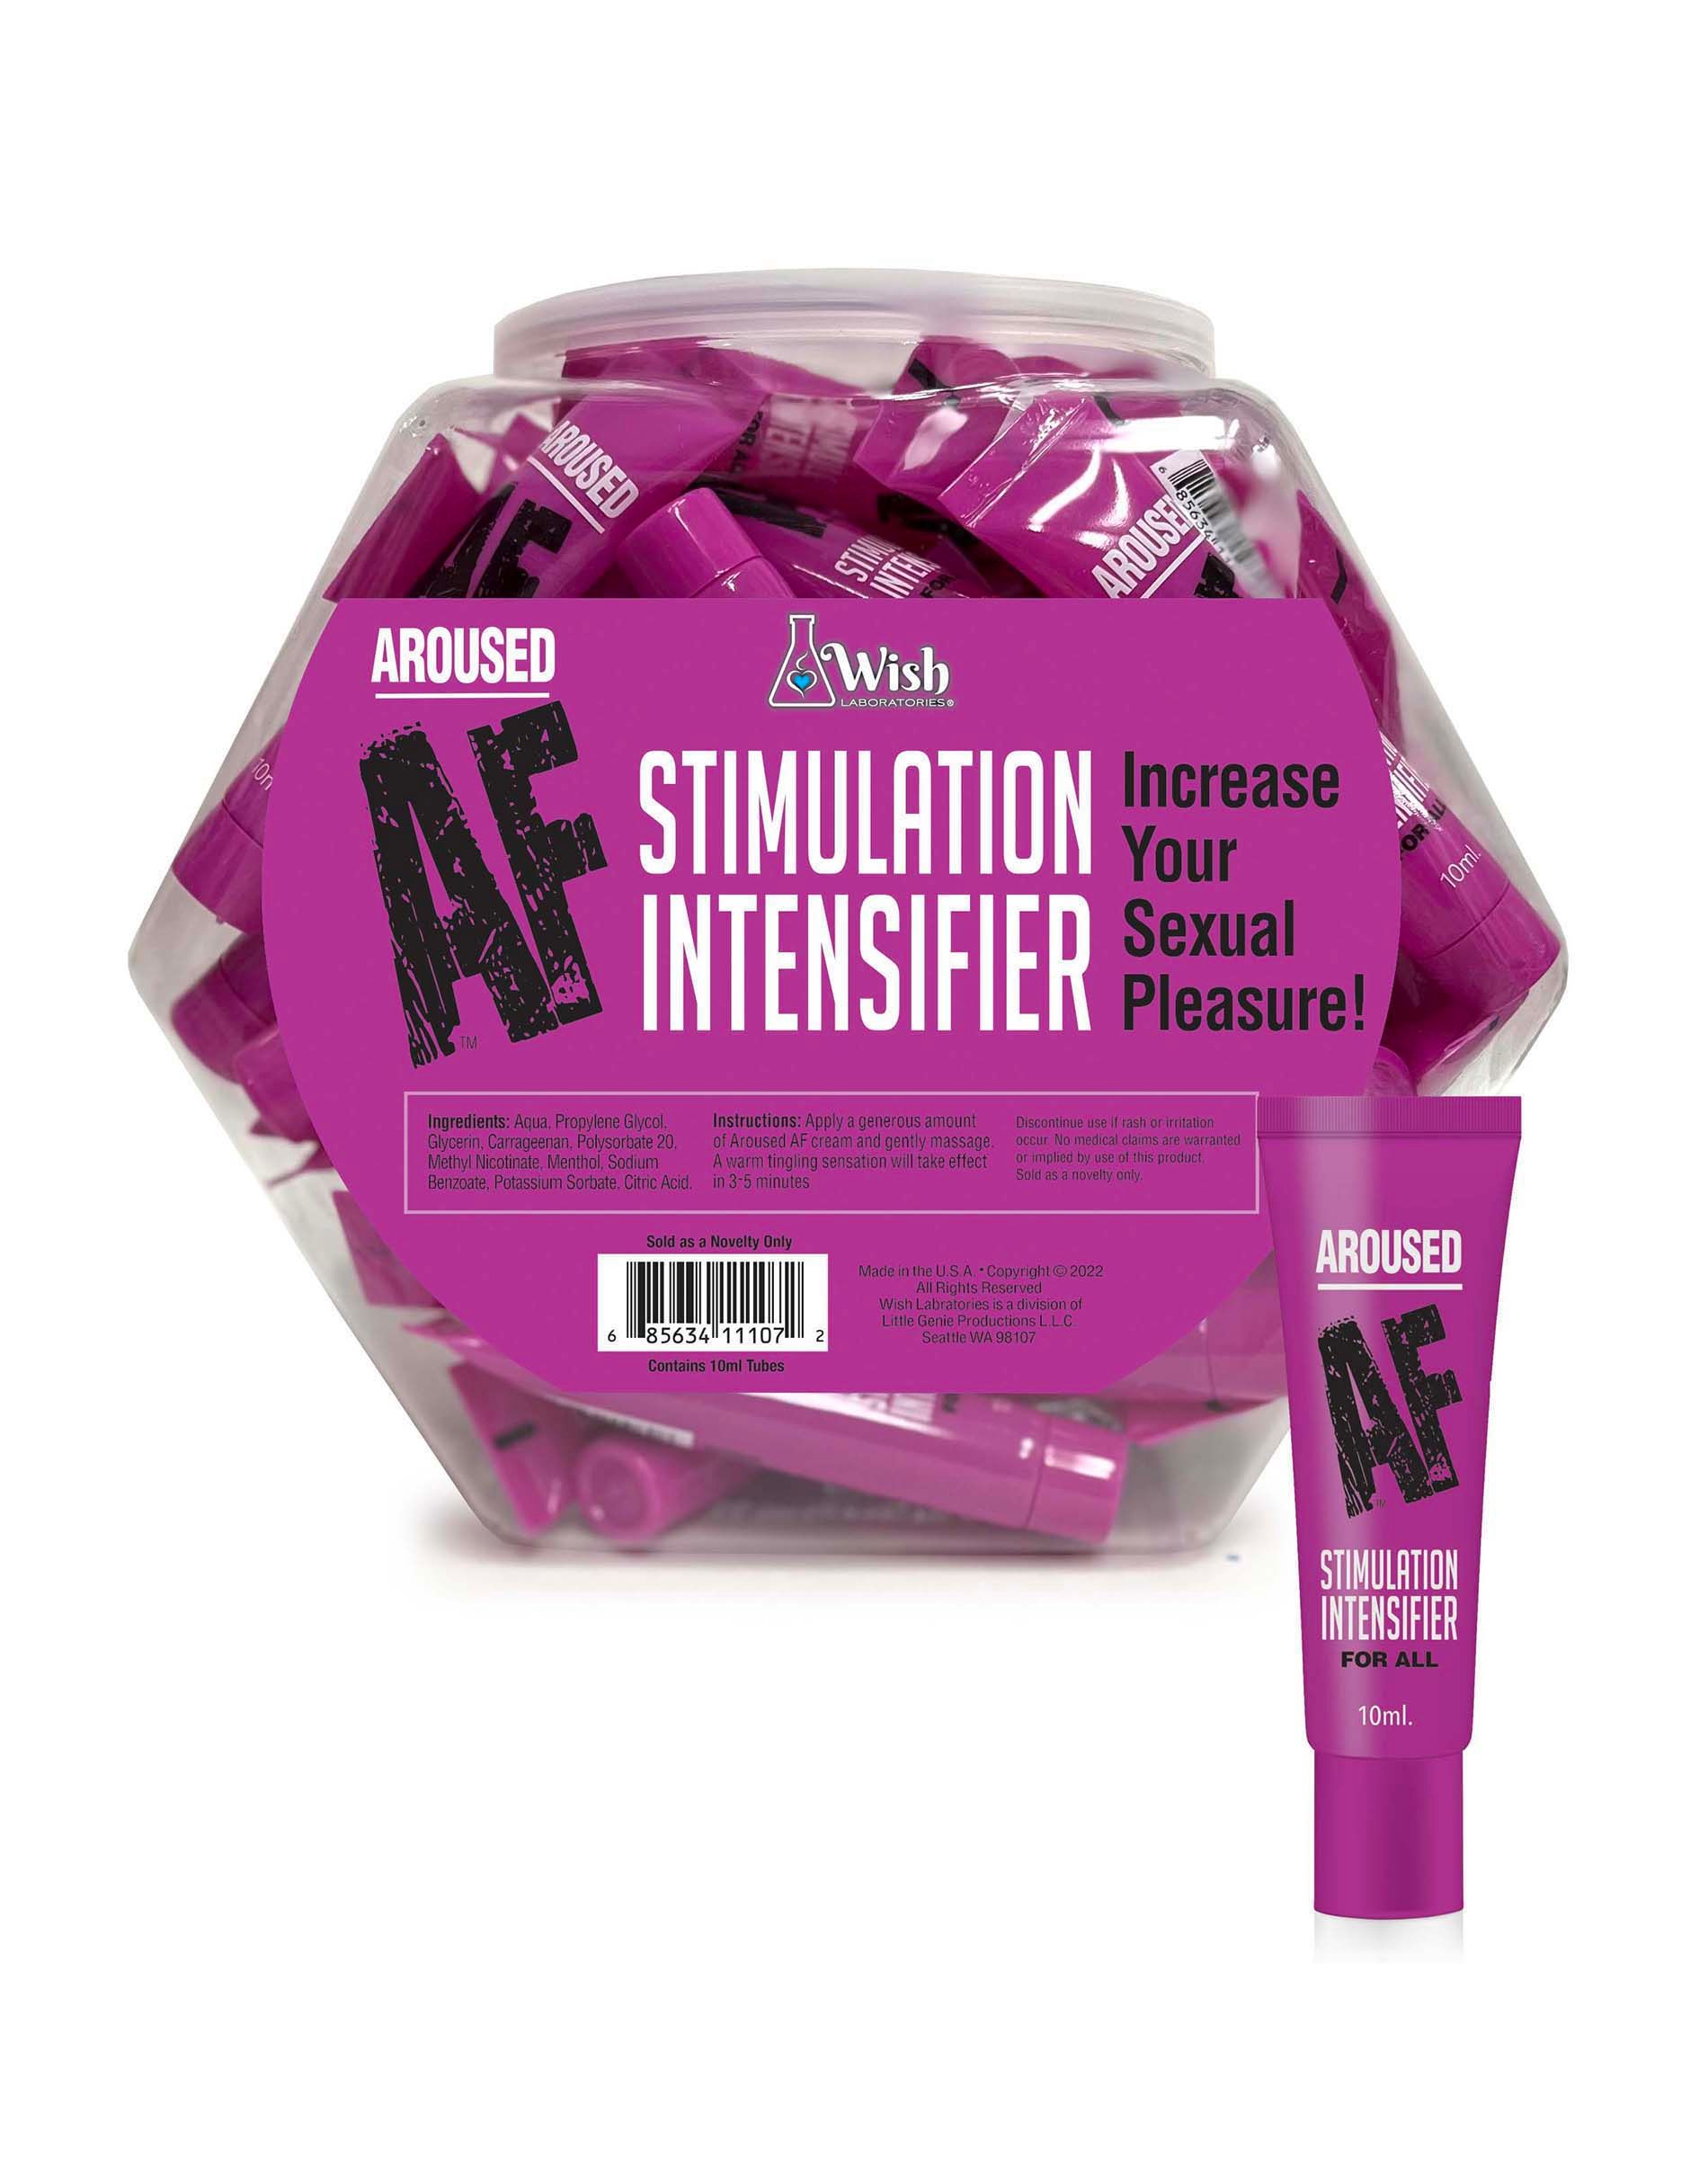 AROUSED AF FISHBOWL 65 PACK STIMULATION CREAM 10ML - Click Image to Close